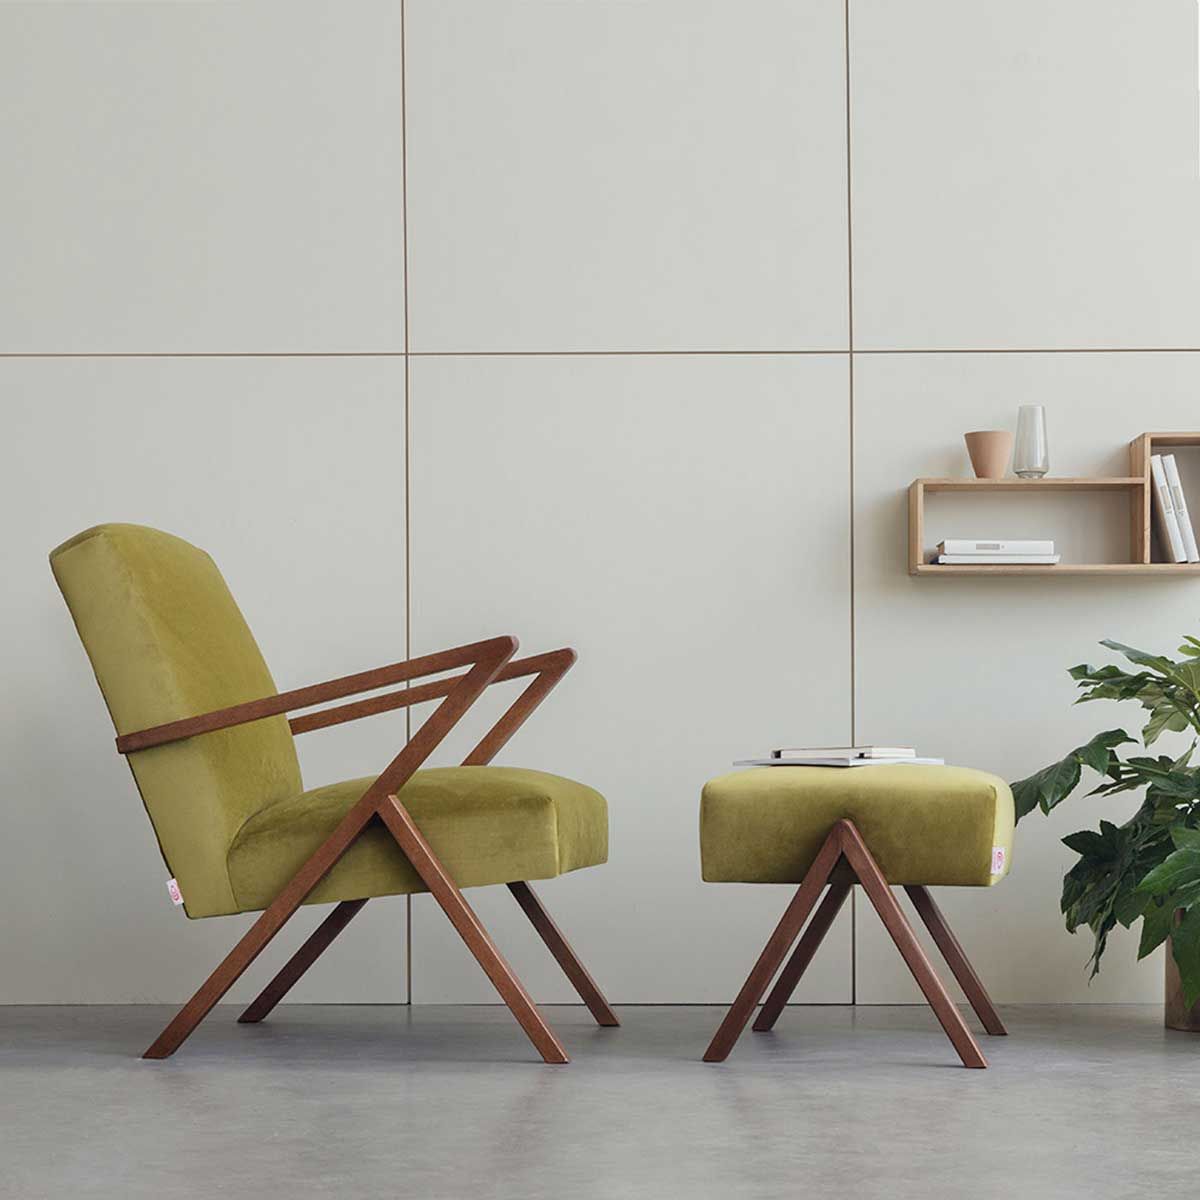 Sustainable furniture at Bombinate